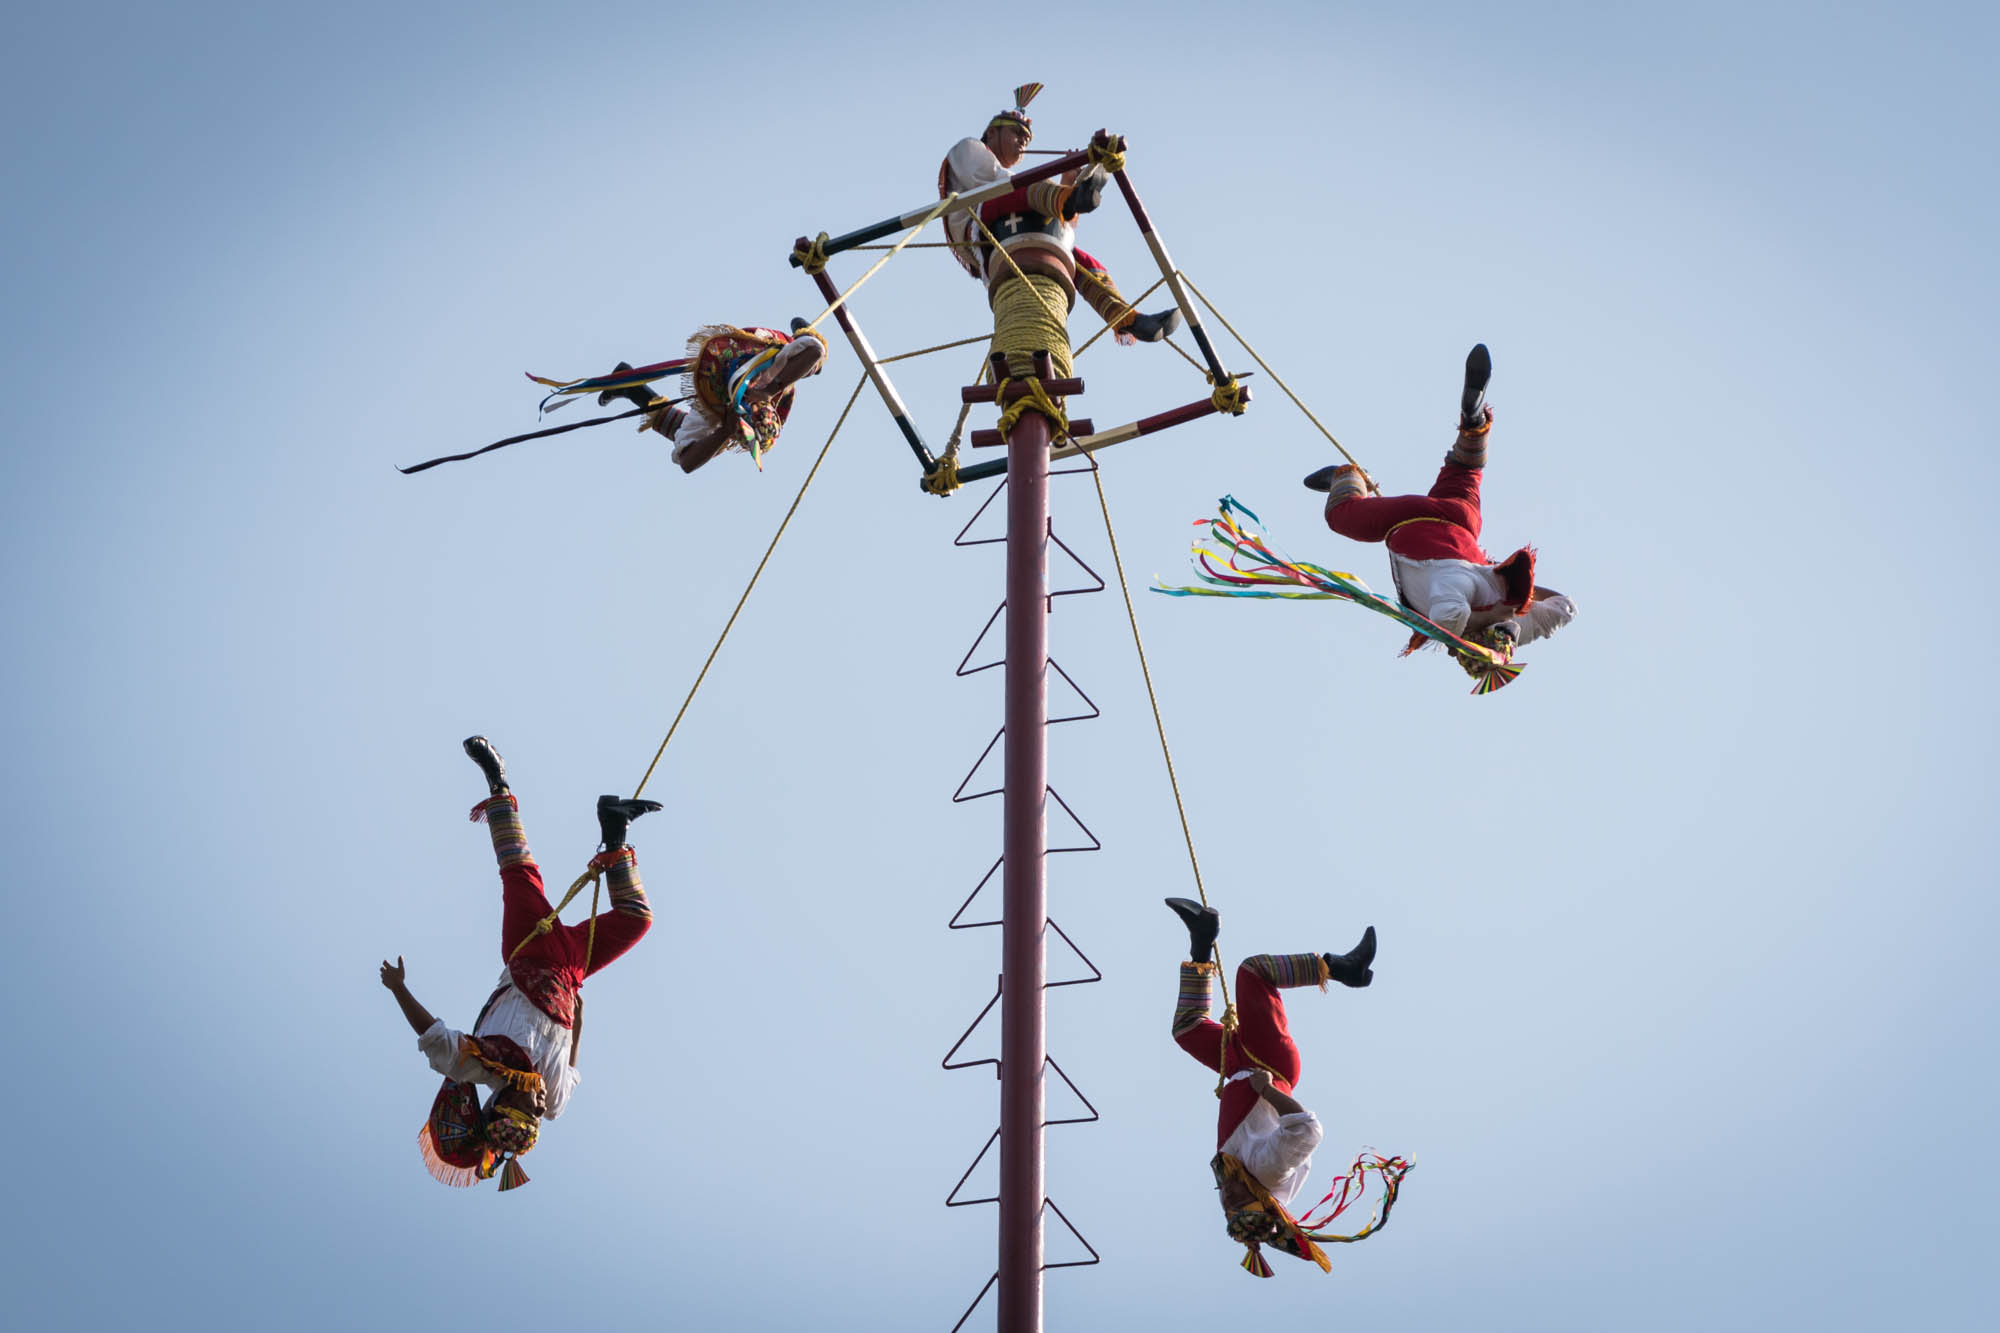 Acrobats flying around a pole outside the anthropological museum in Mexico City